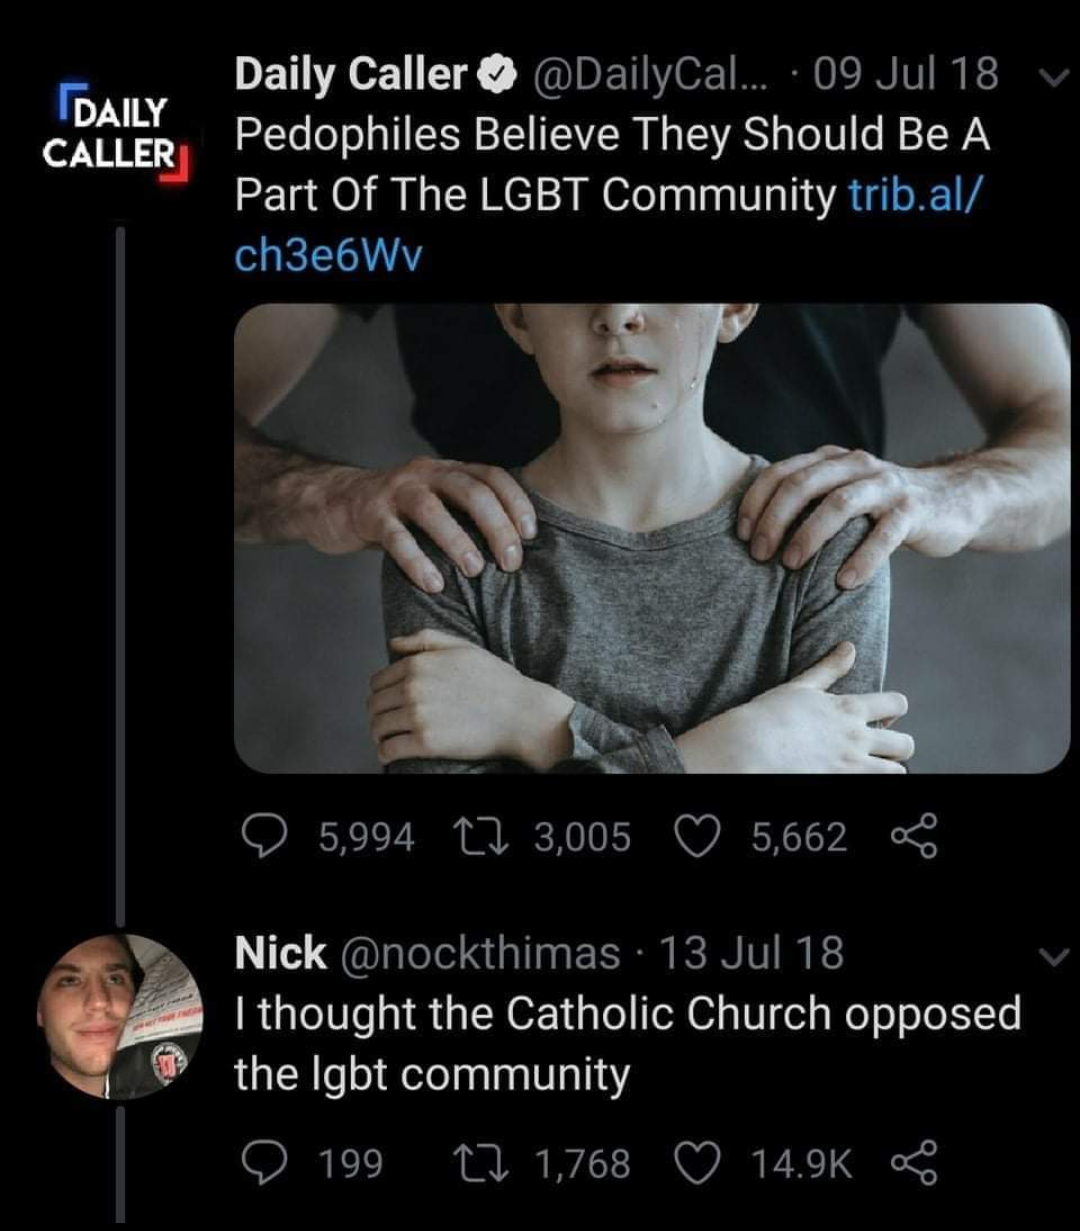 LGBT - Daily Caller Daily Caller ... 09 Jul 18 Pedophiles Believe They Should Be A, Part Of The Lgbt Community trib.al ch3e6Wv 5,994 Lj 3,005 5,662 Nick 13 Jul 18 I thought the Catholic Church opposed the lgbt community 199 12 1,768